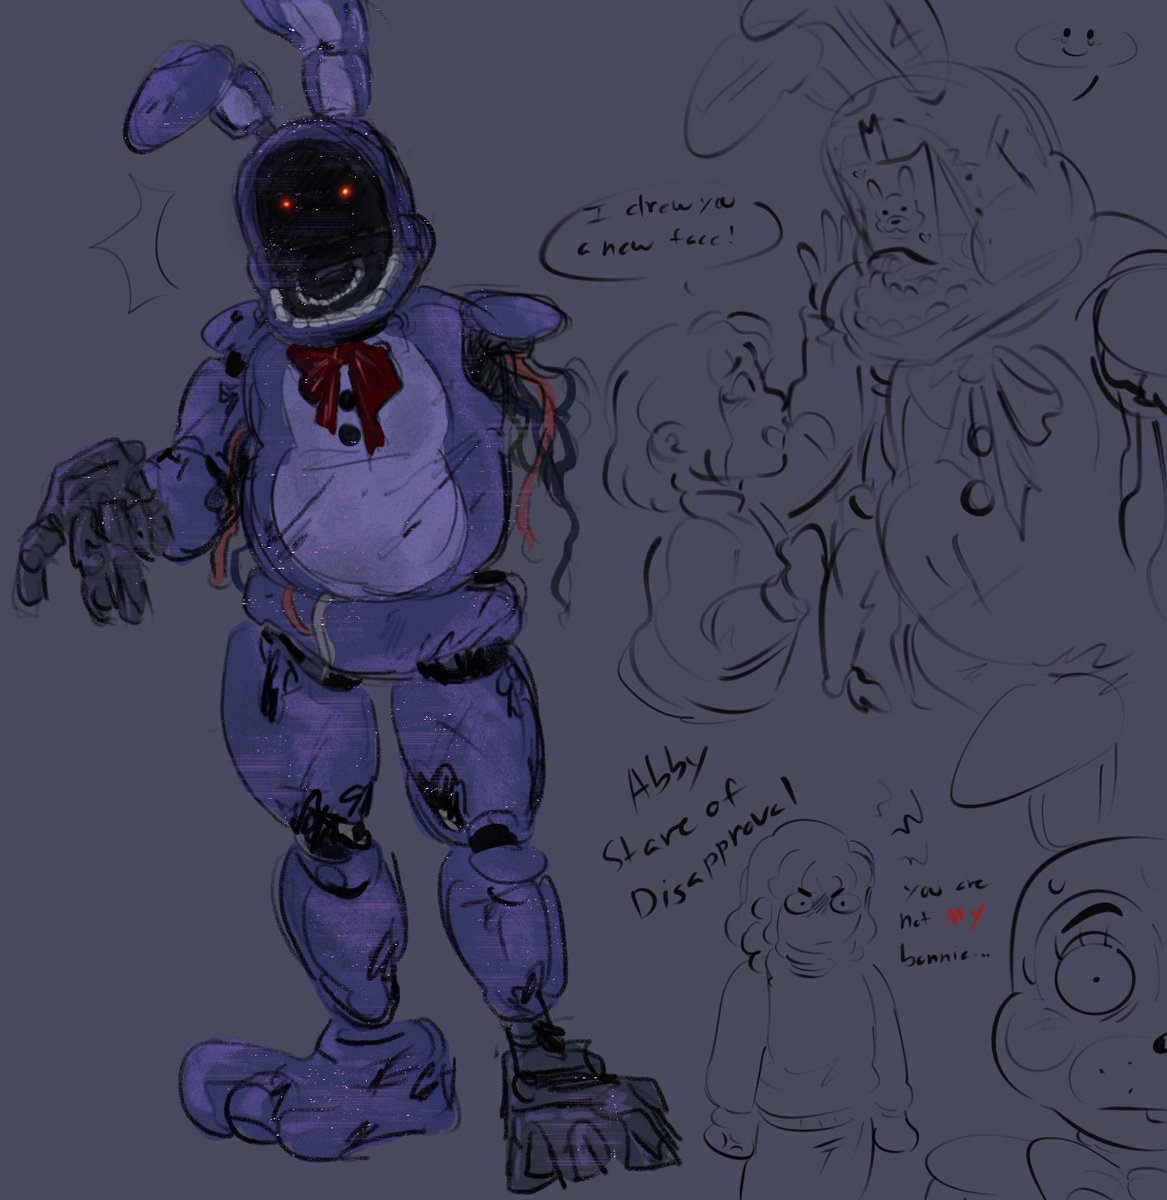 Anybody else think Abby ain’t gonna be too fond of TB? Bc he “replaced” her bestie? #fnaf #fnaf2